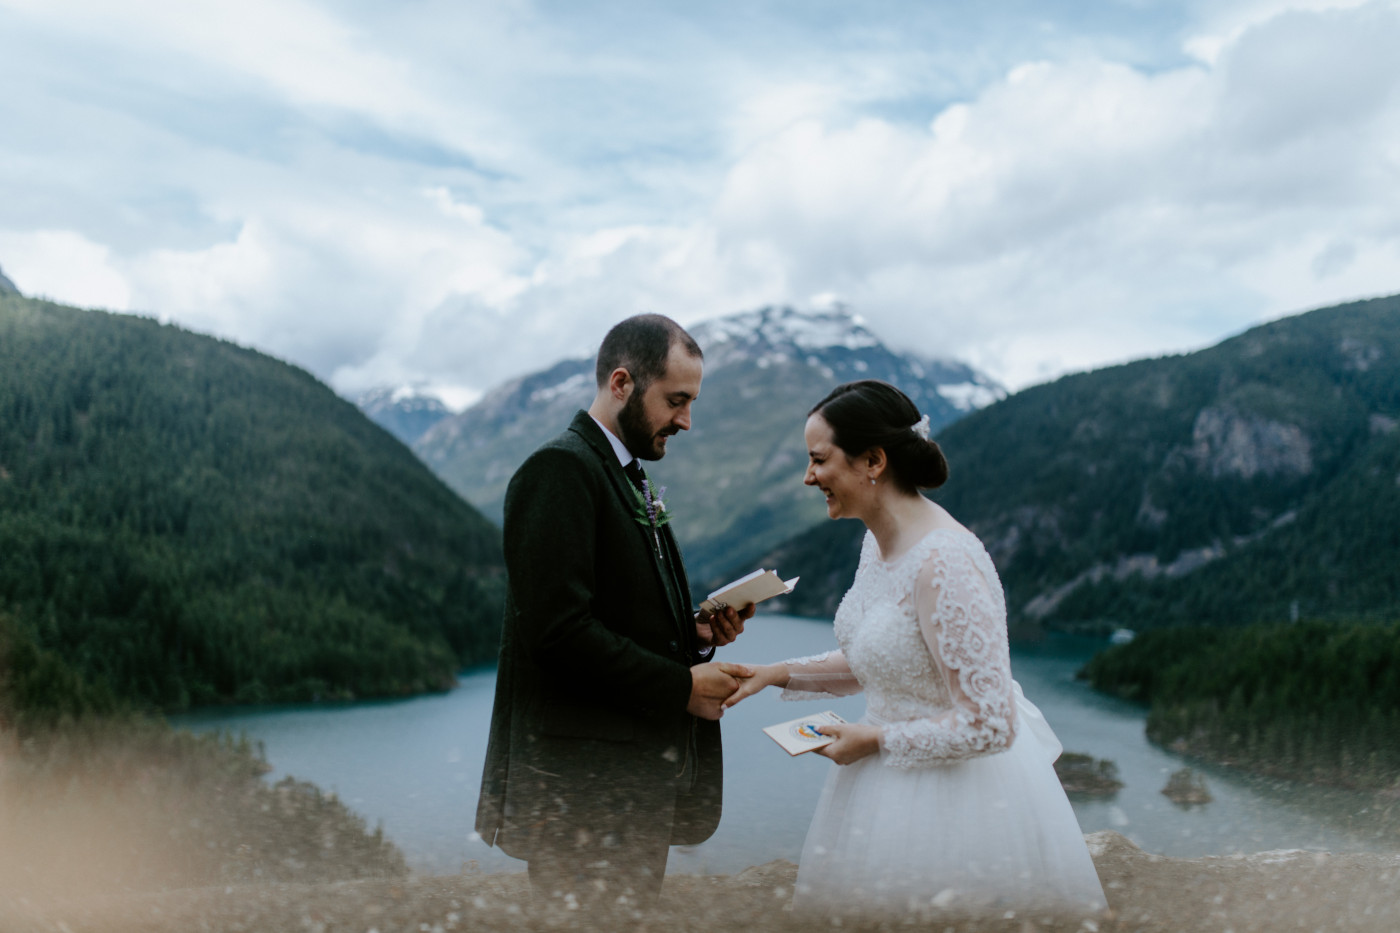 Alex and Elizabeth during their elopement. Elopement photography at North Cascades National Park by Sienna Plus Josh.